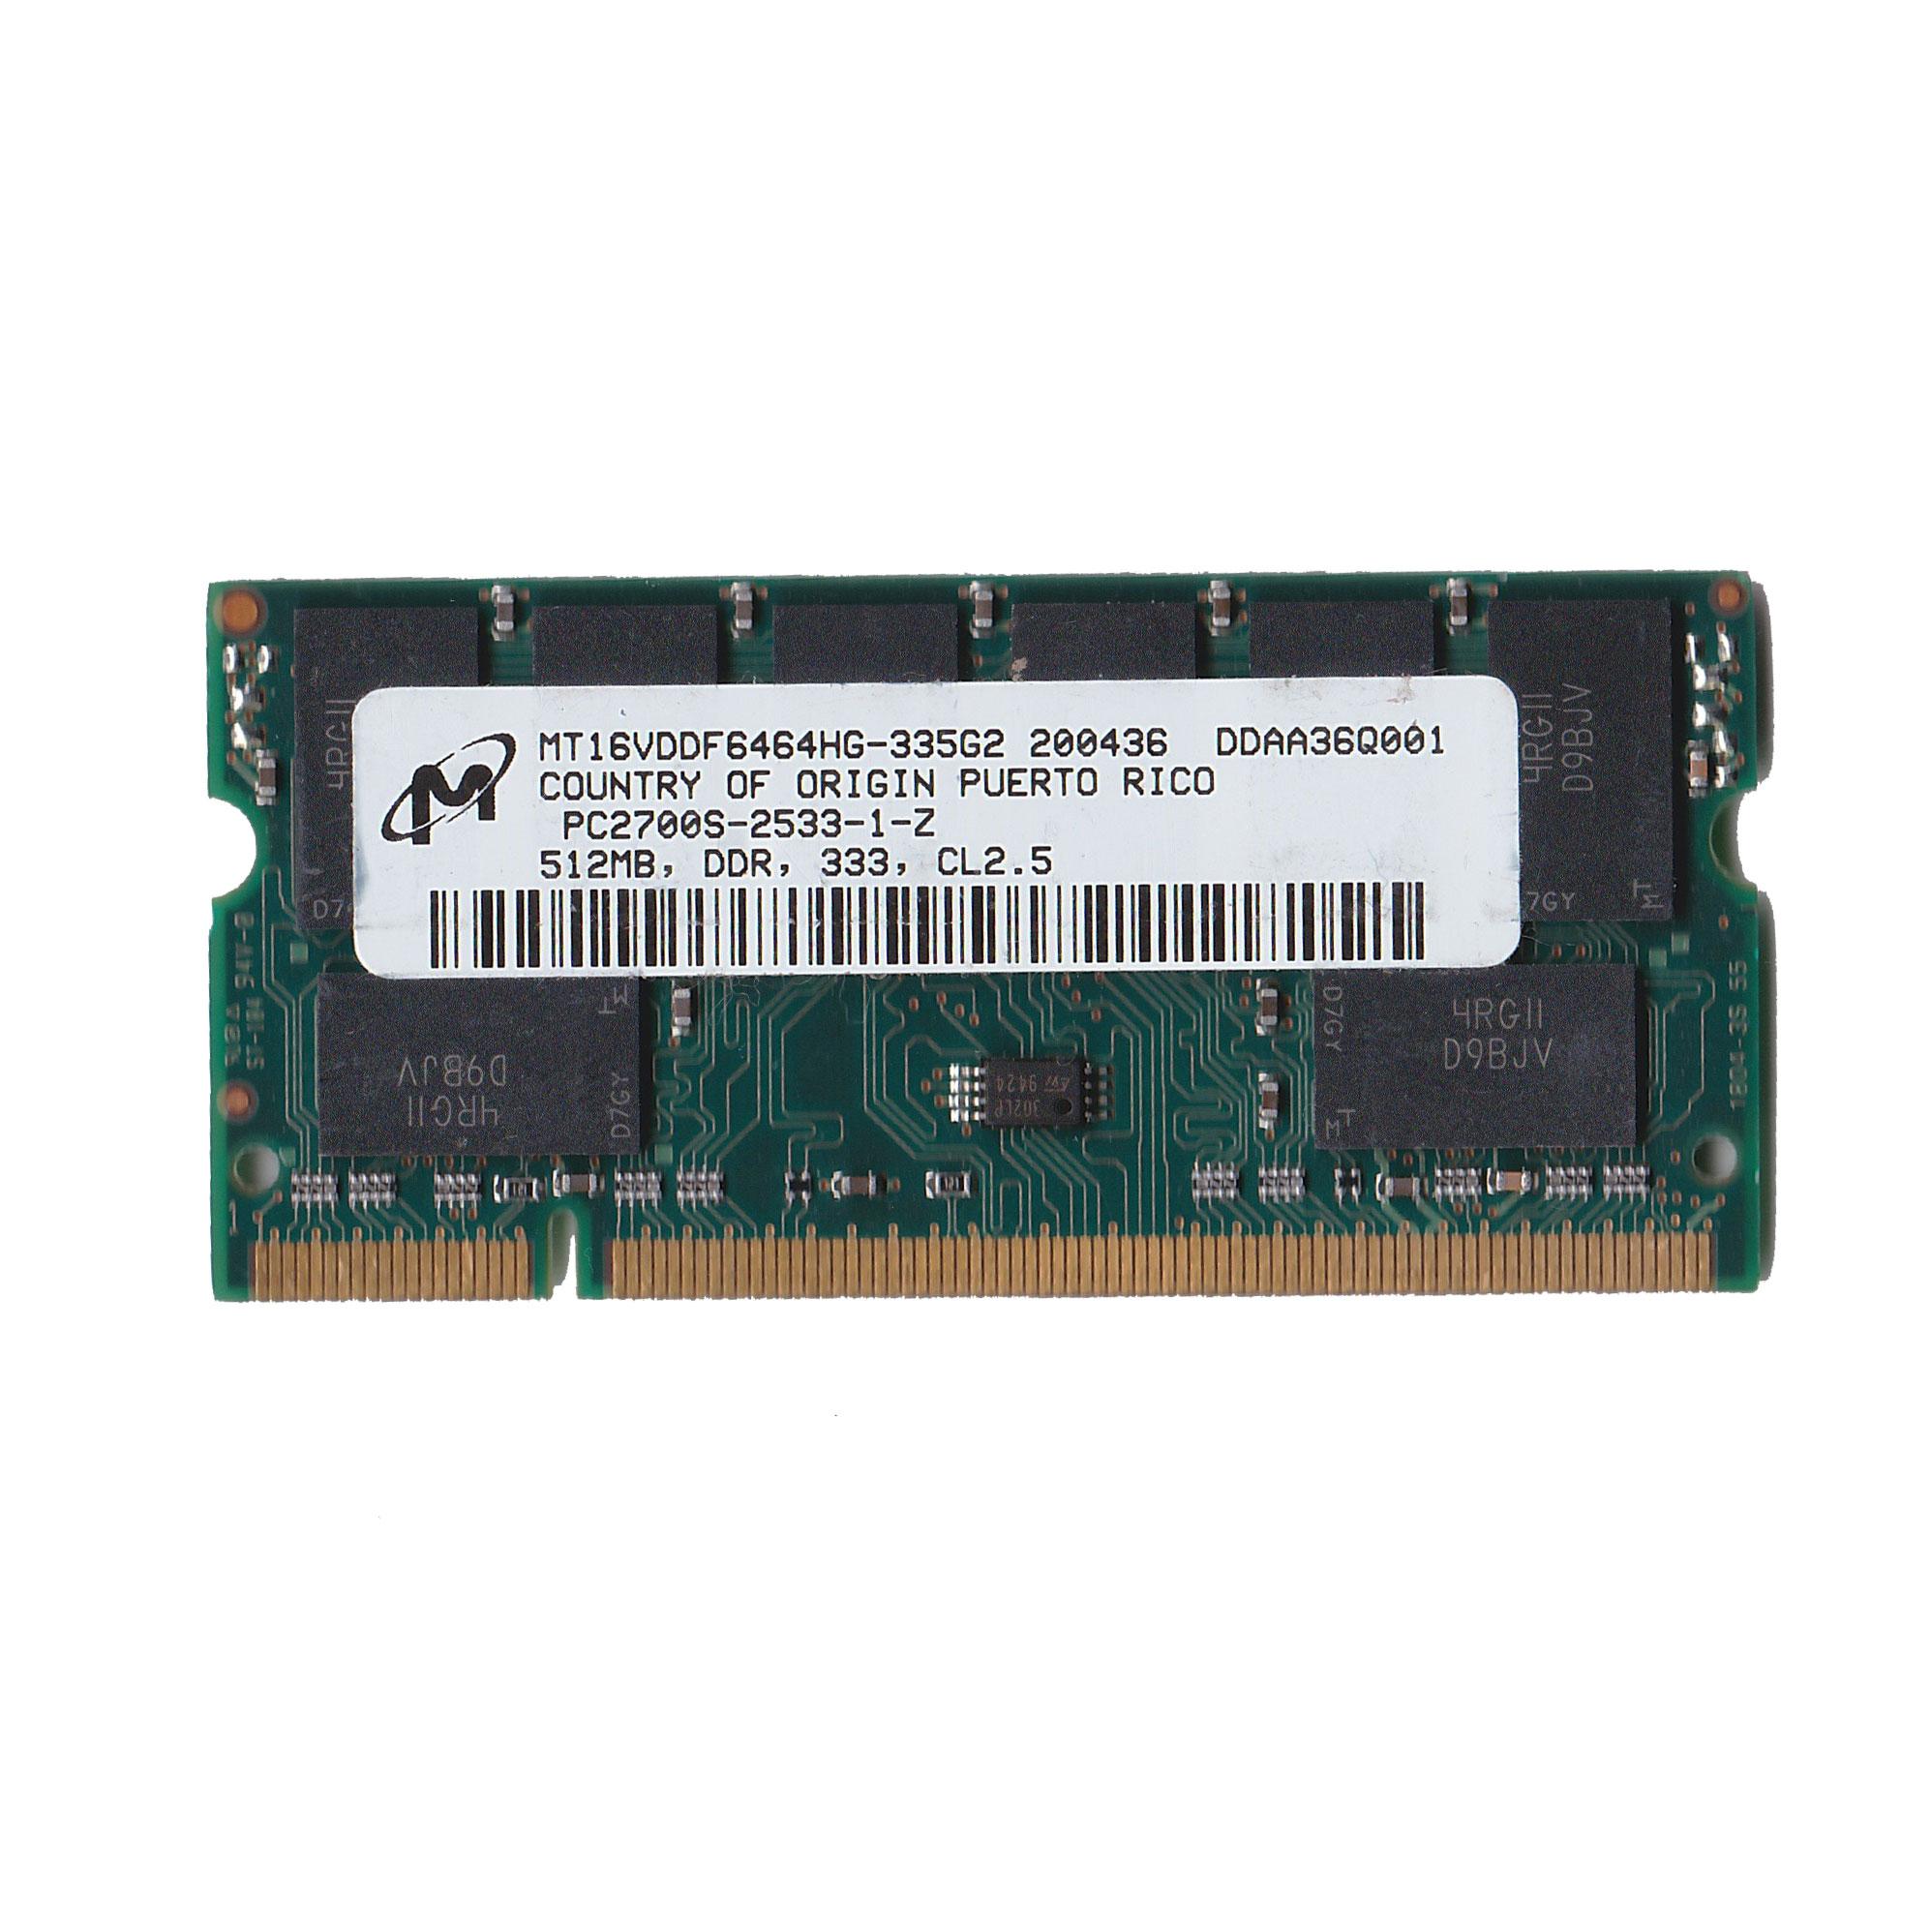 Preowned APPLE LAPTOP MEMORY MODULE M9595GA PC2700S-2533-1-Z 512MB DDR-333 CL2.5 - Untested